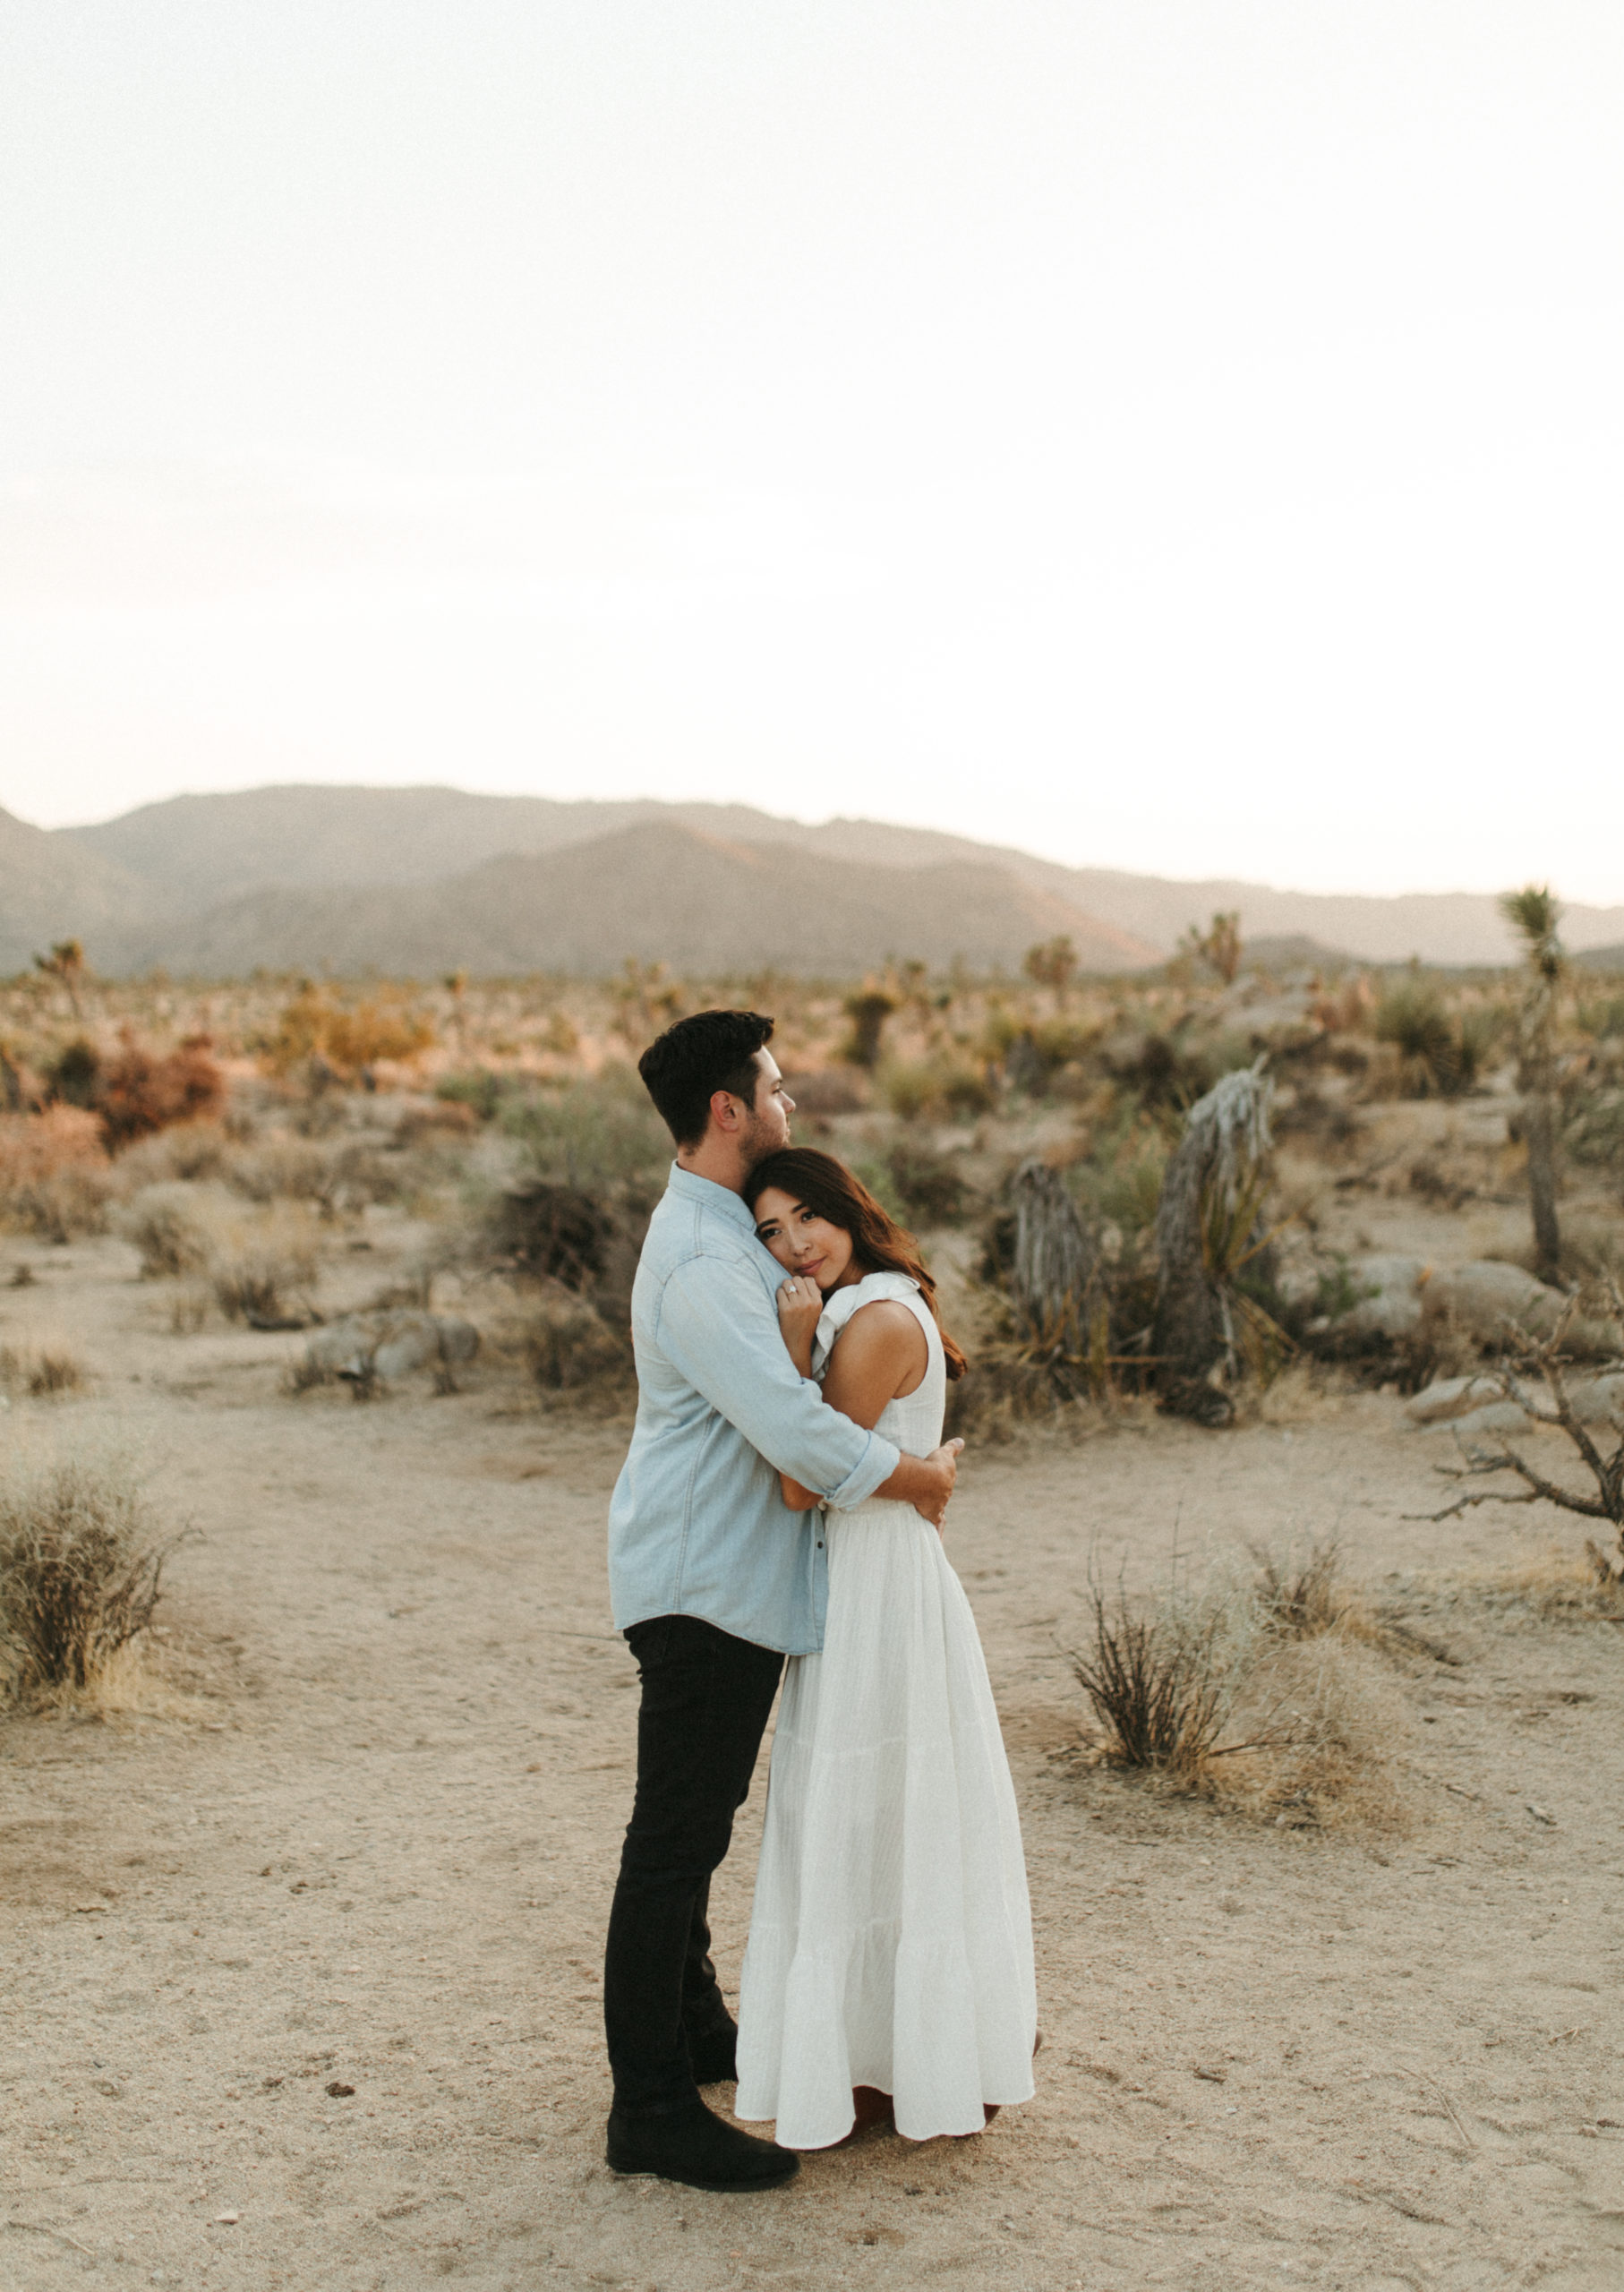 A romantic and earthy engagement session in the Joshua Tree National Park desert during sunset by Lauryn Victoria, a California Elopement Photographer.